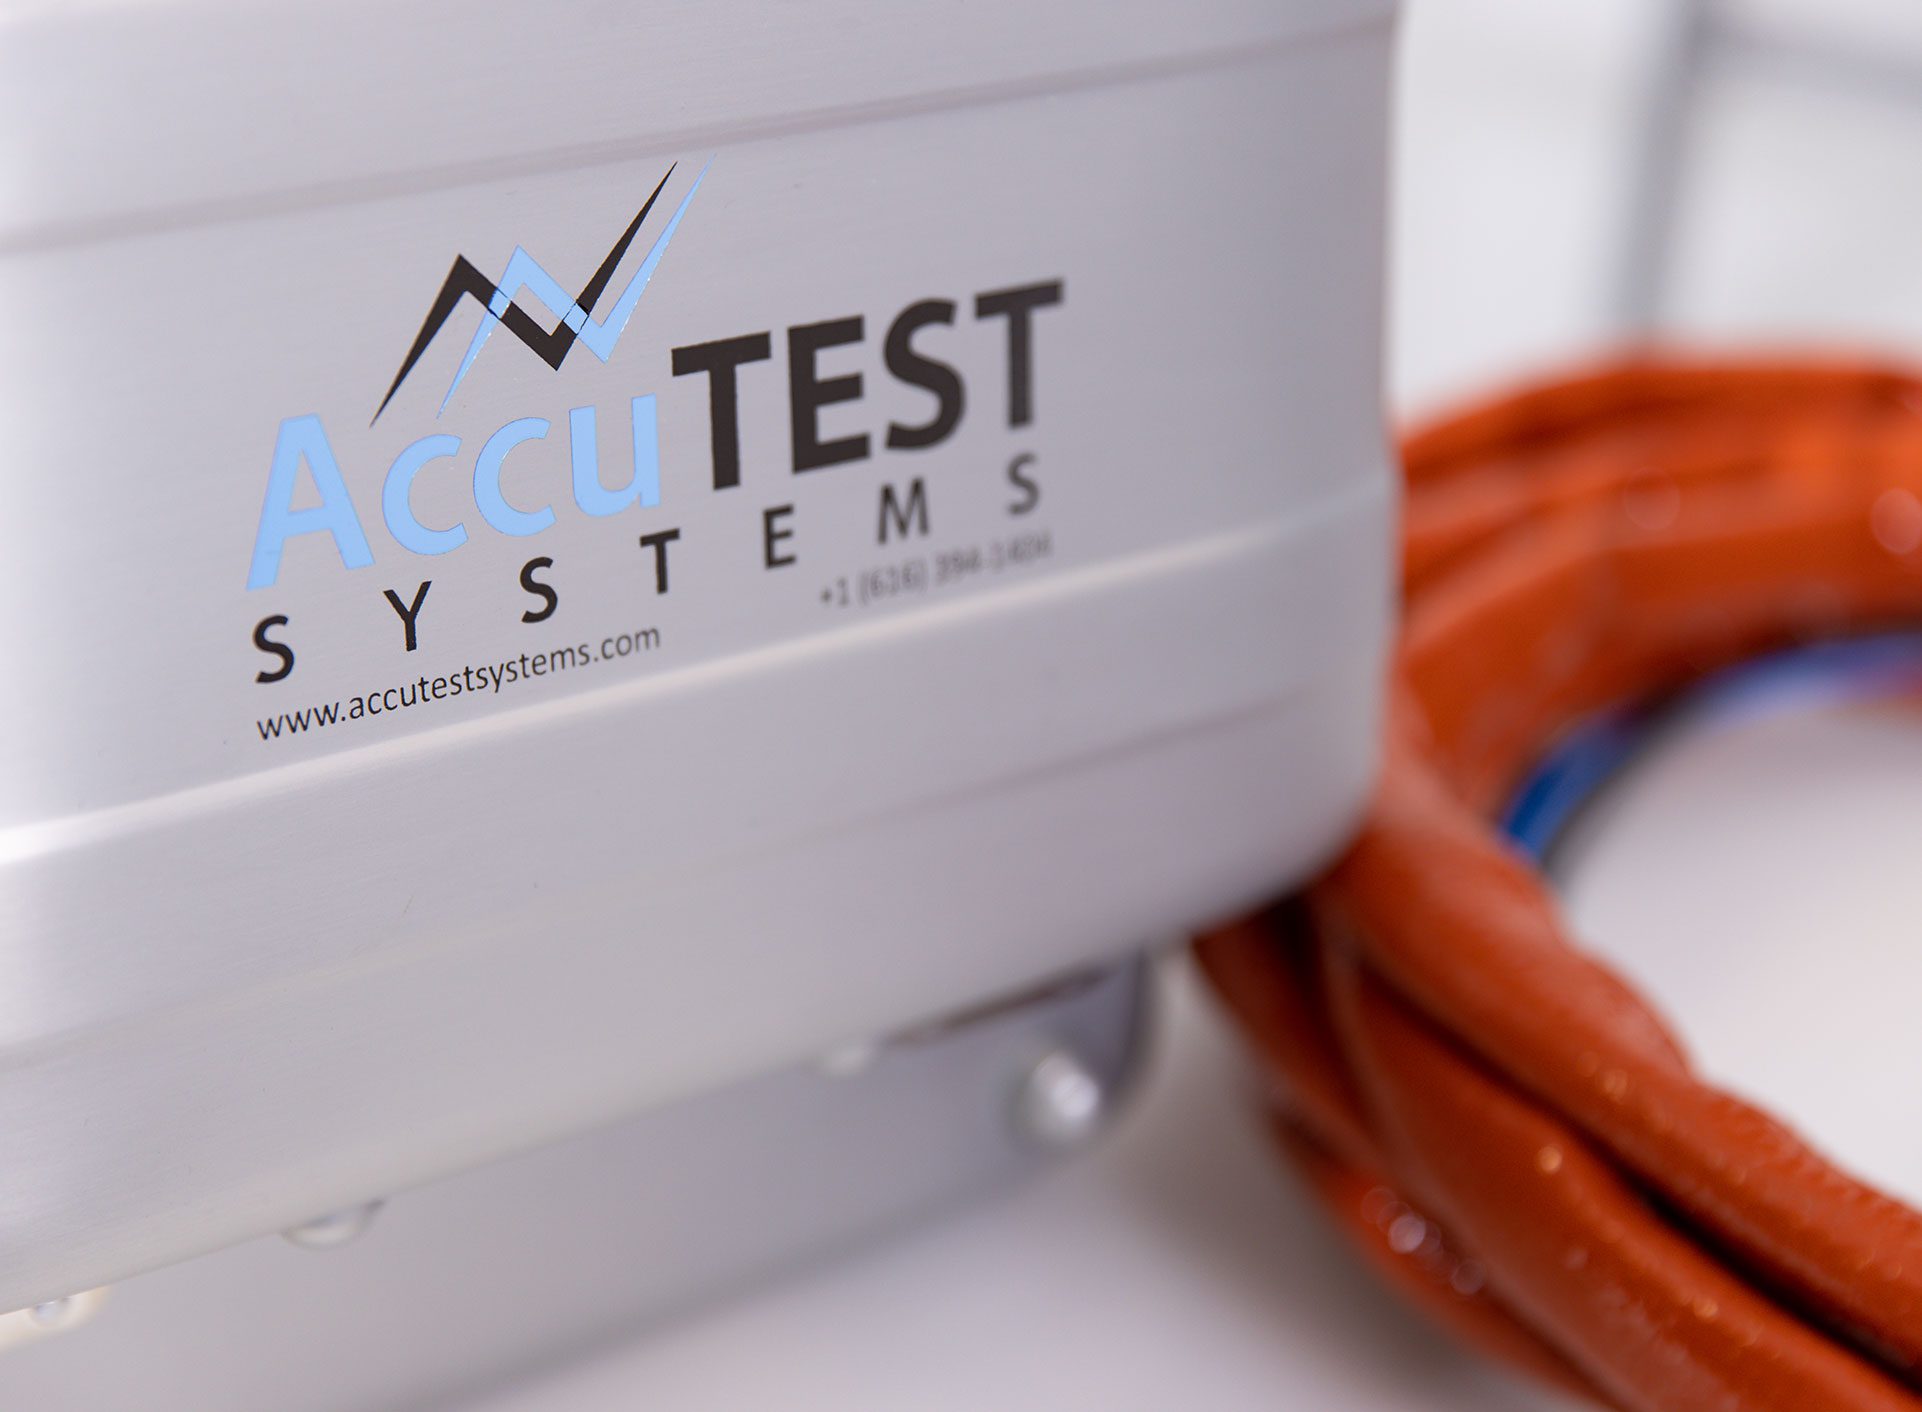 Close up of Accutest Valve System showing logo